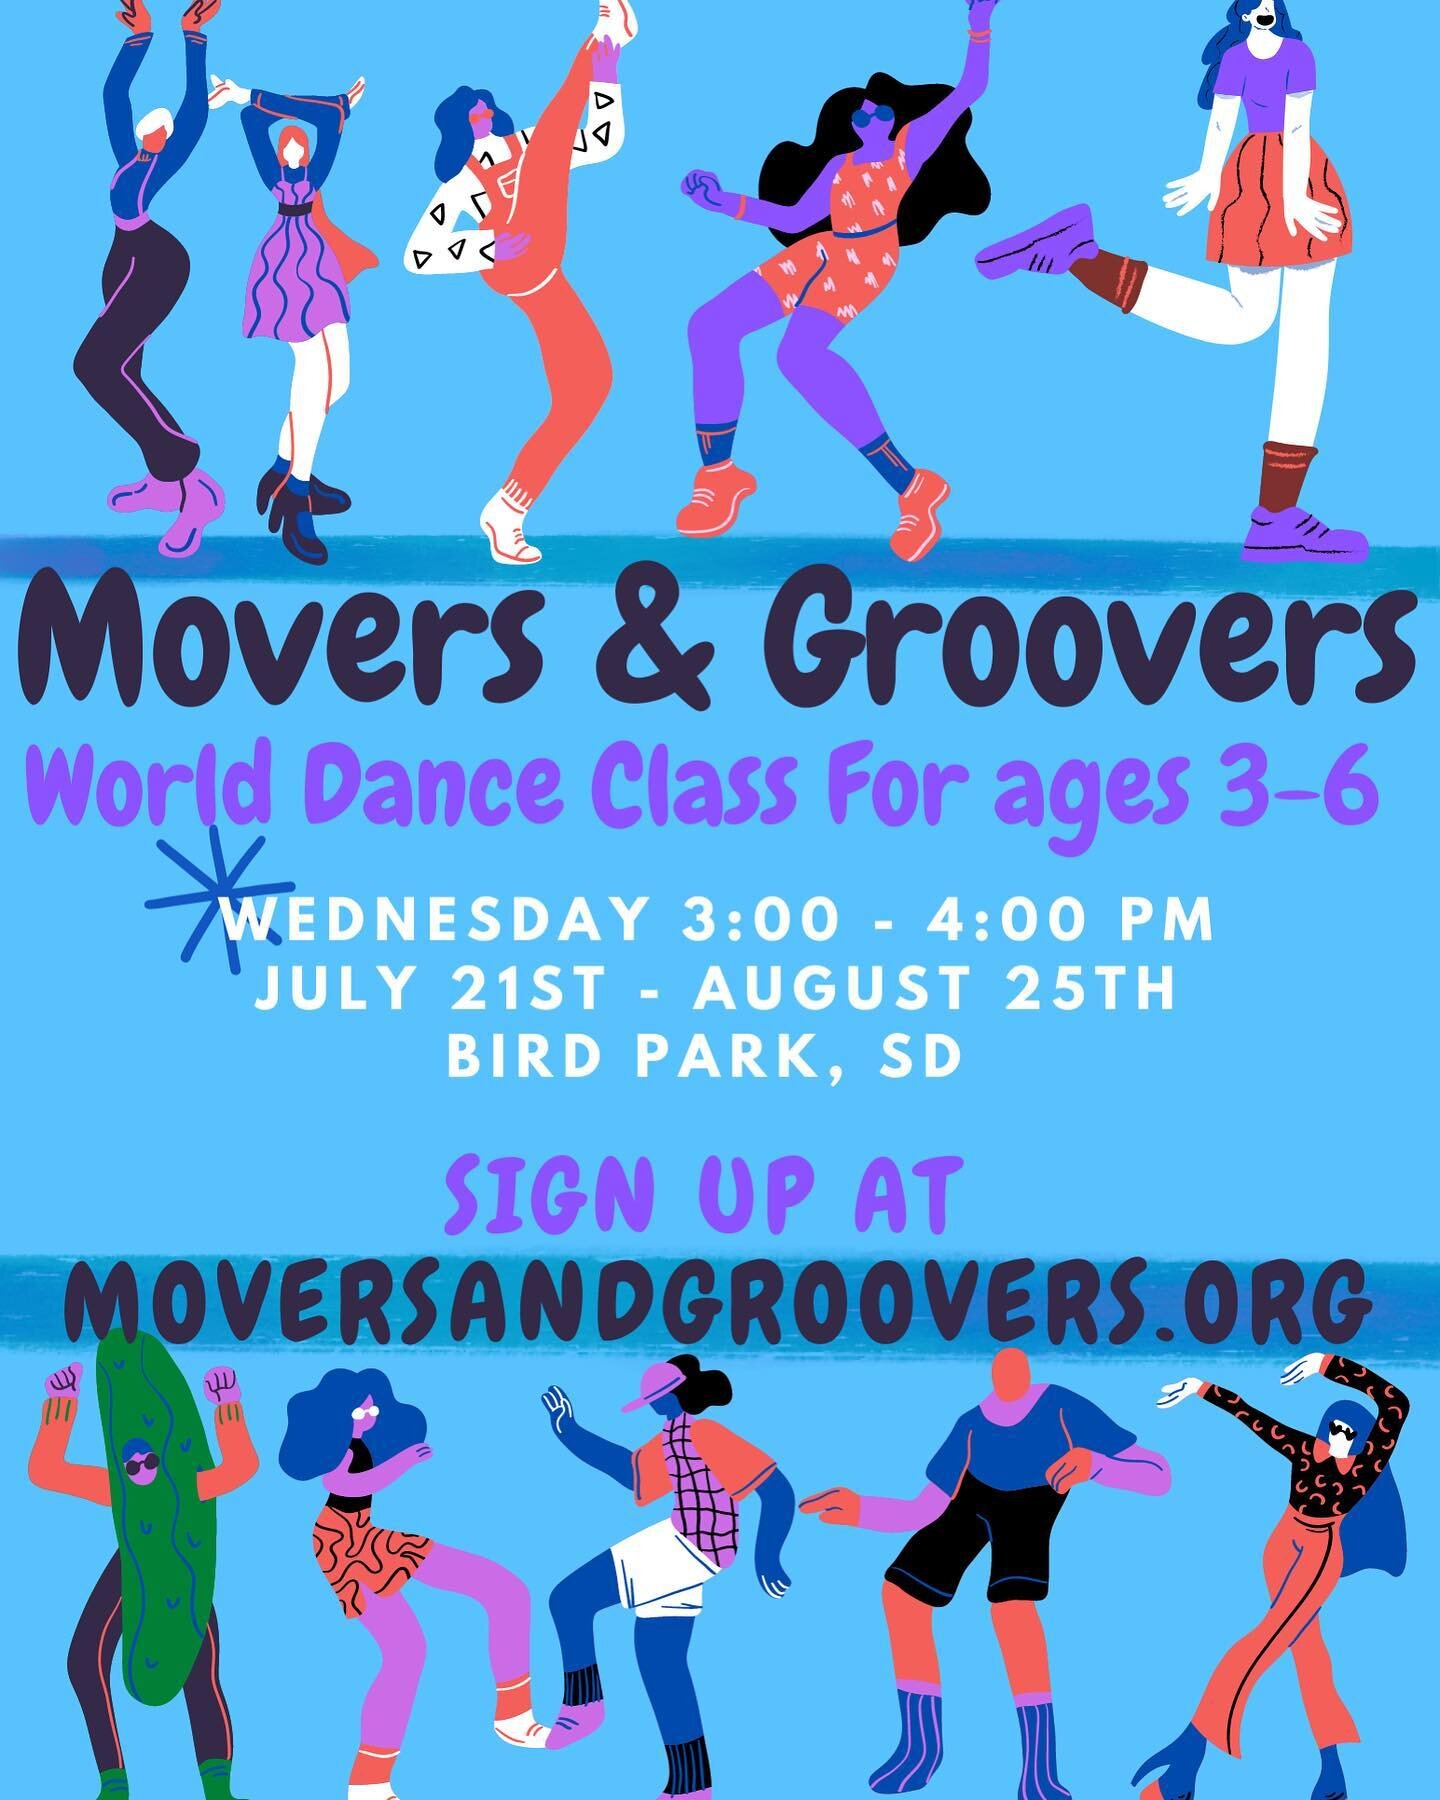 Movers and Groovers preschool dance class will be back at the park starting in July! Come wiggle and shake with Fancy Nancy Wednesday&rsquo;s from 3:00-4:00pm at Bird Park located in South Park, SD. Ages 3-6! Sign up at moversandgroovers.org